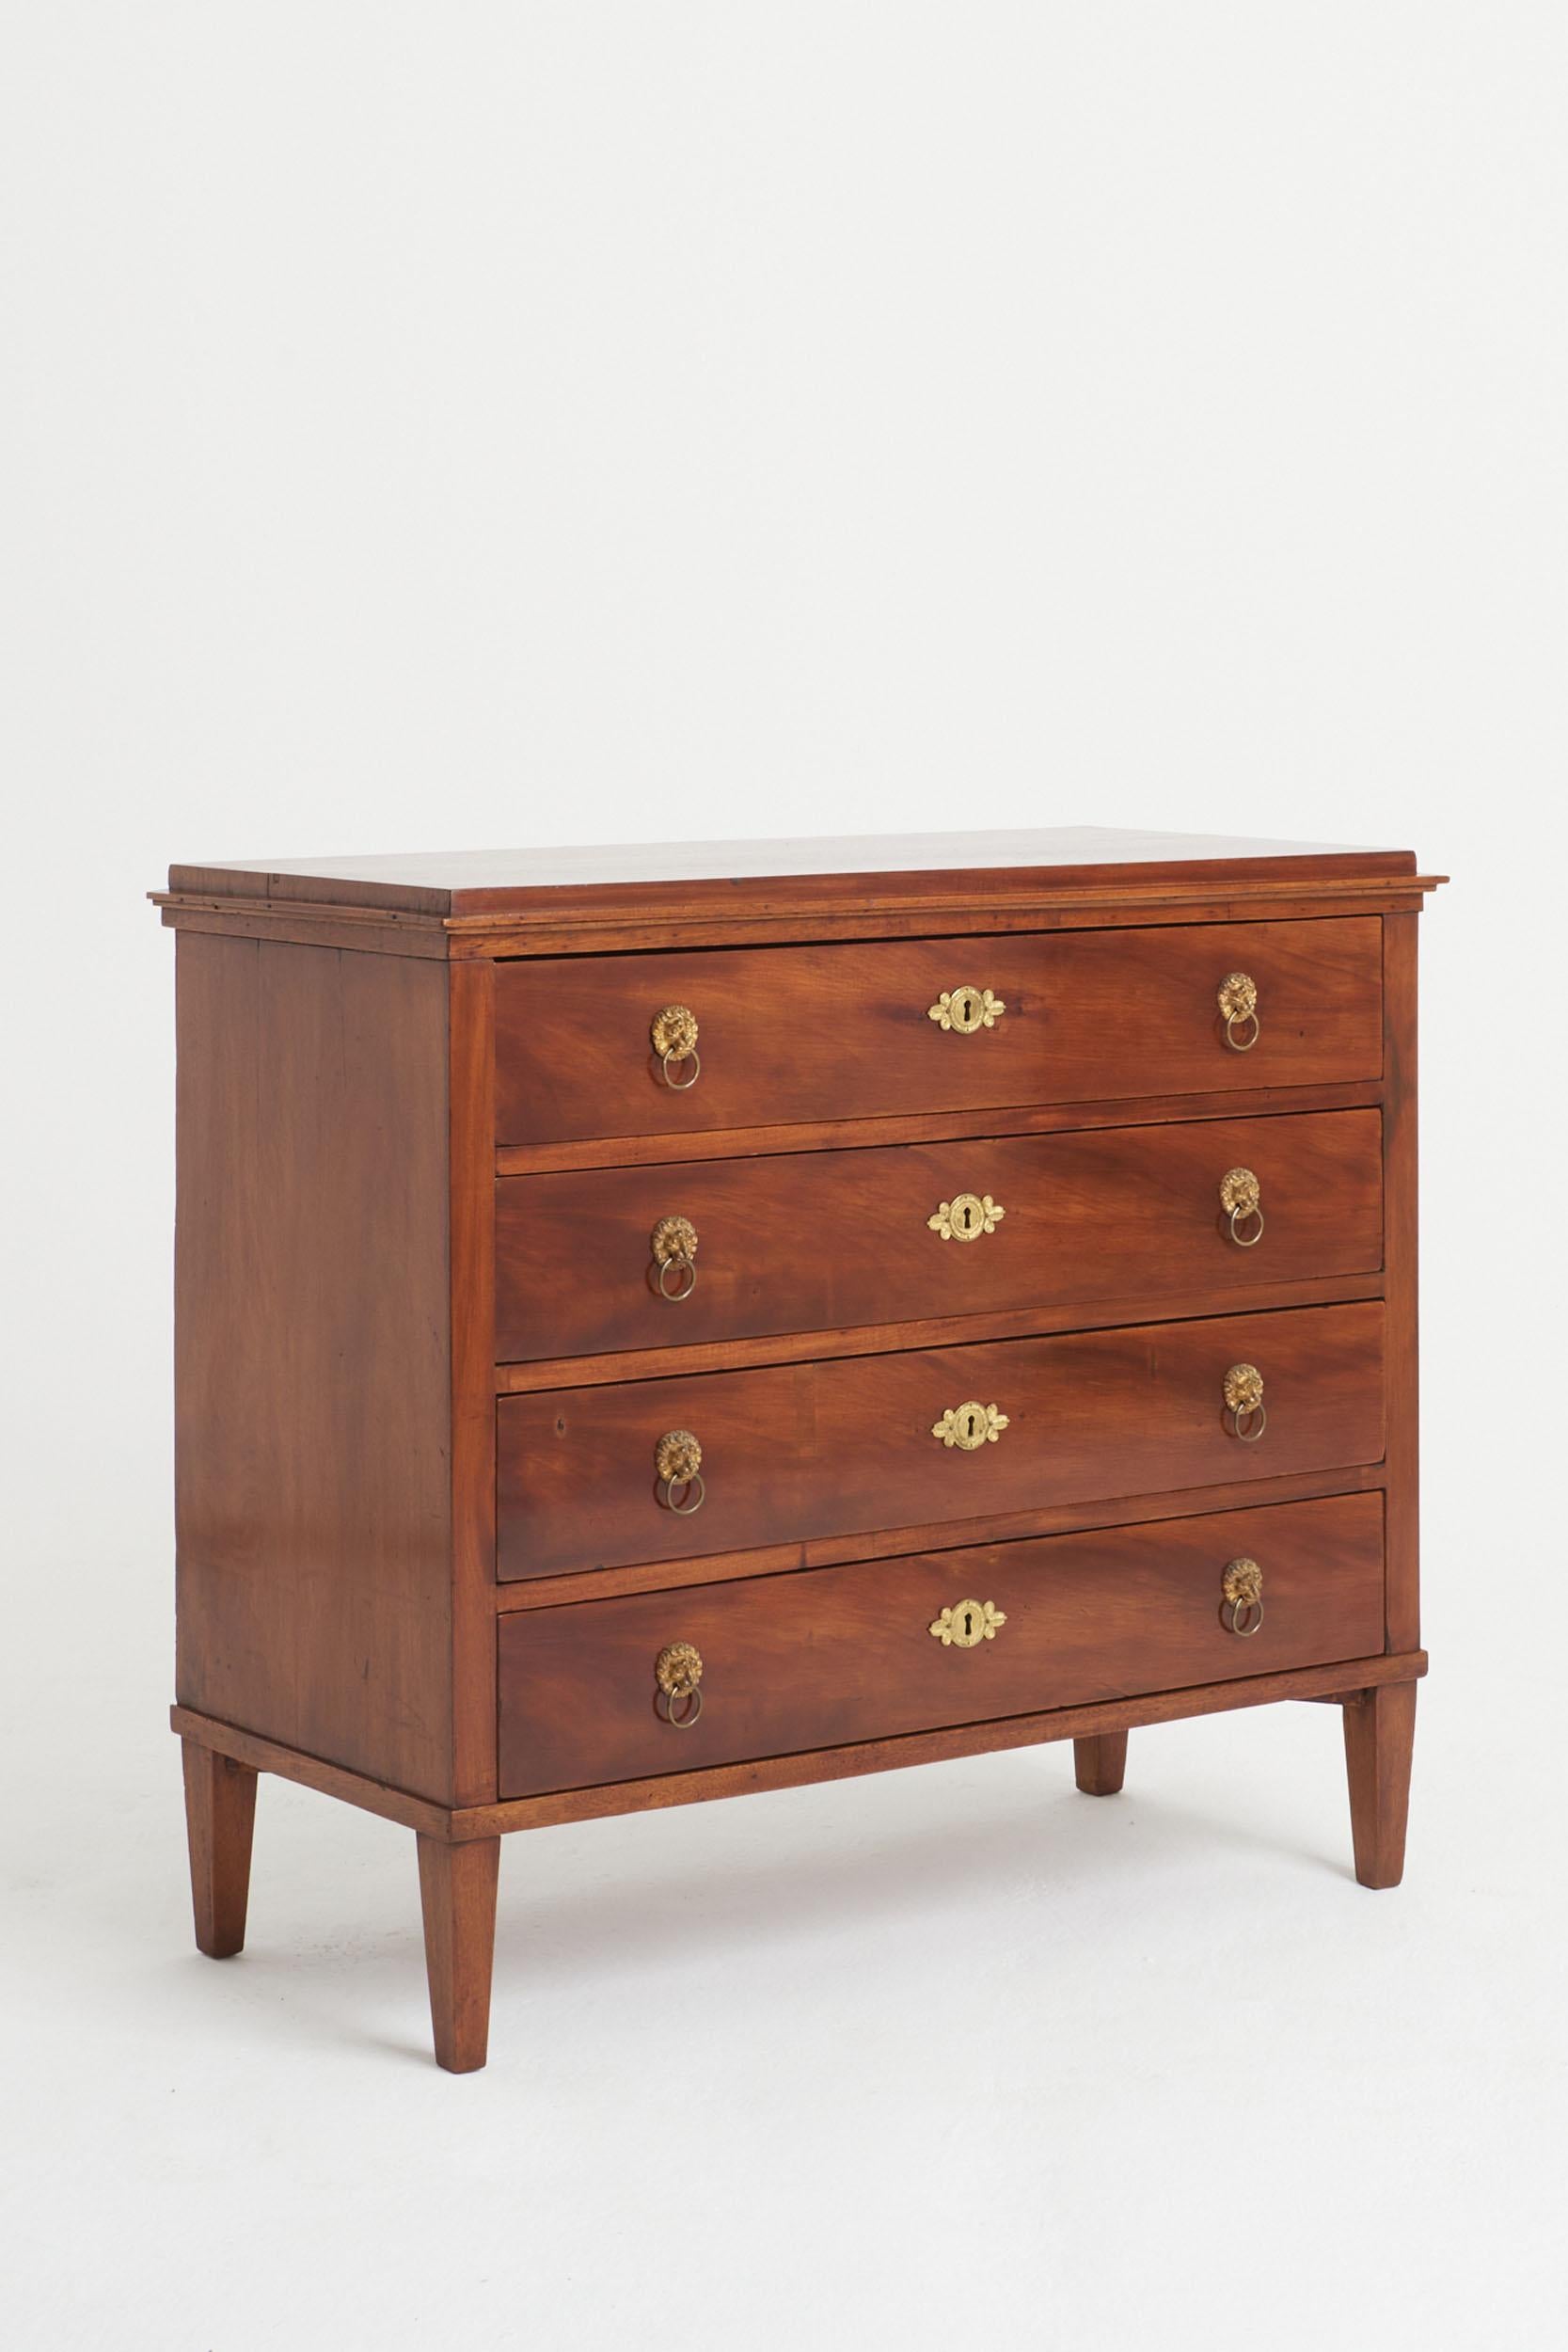 Swedish Empire Mahogany Chest of Drawers For Sale